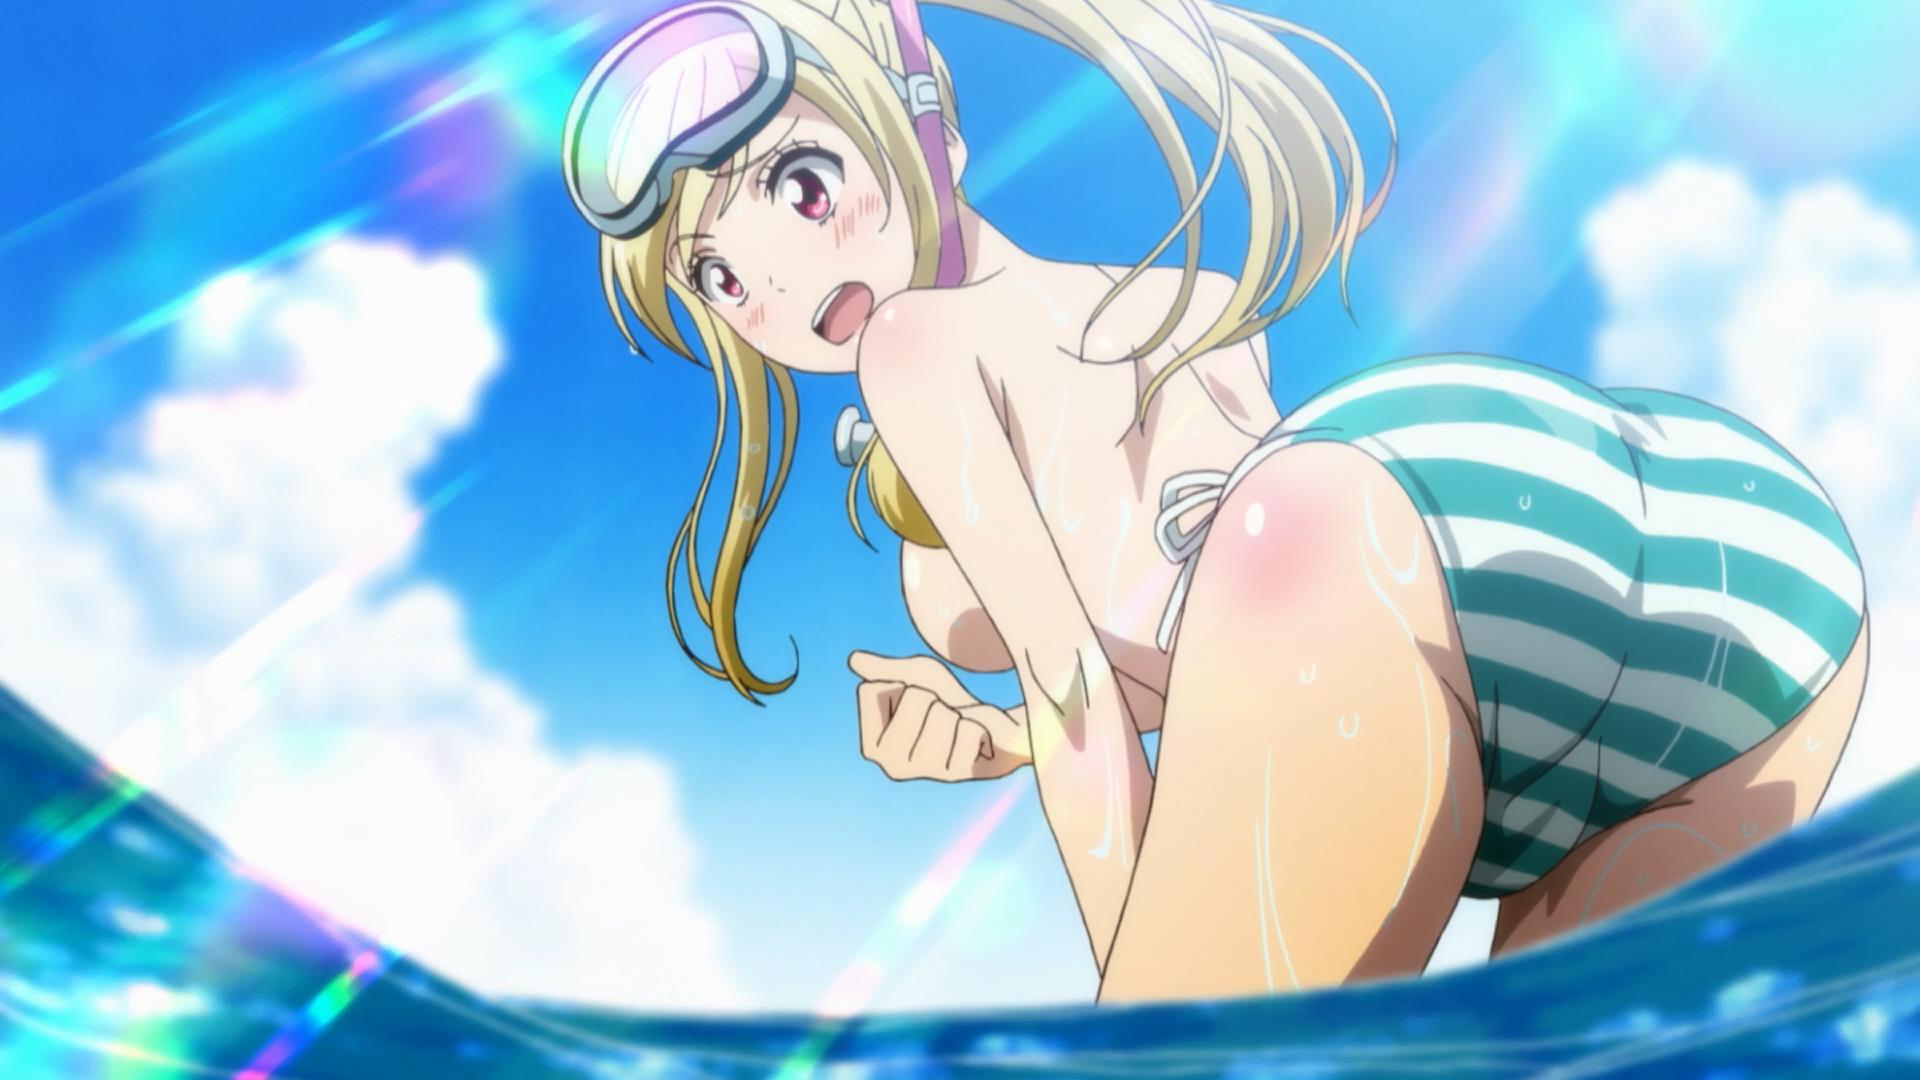 [HorribleSubs] Yamada-kun and the Seven Witches - 06 [1080p].mkv_snapshot_04.05_[2015.05.17_13.38.55]